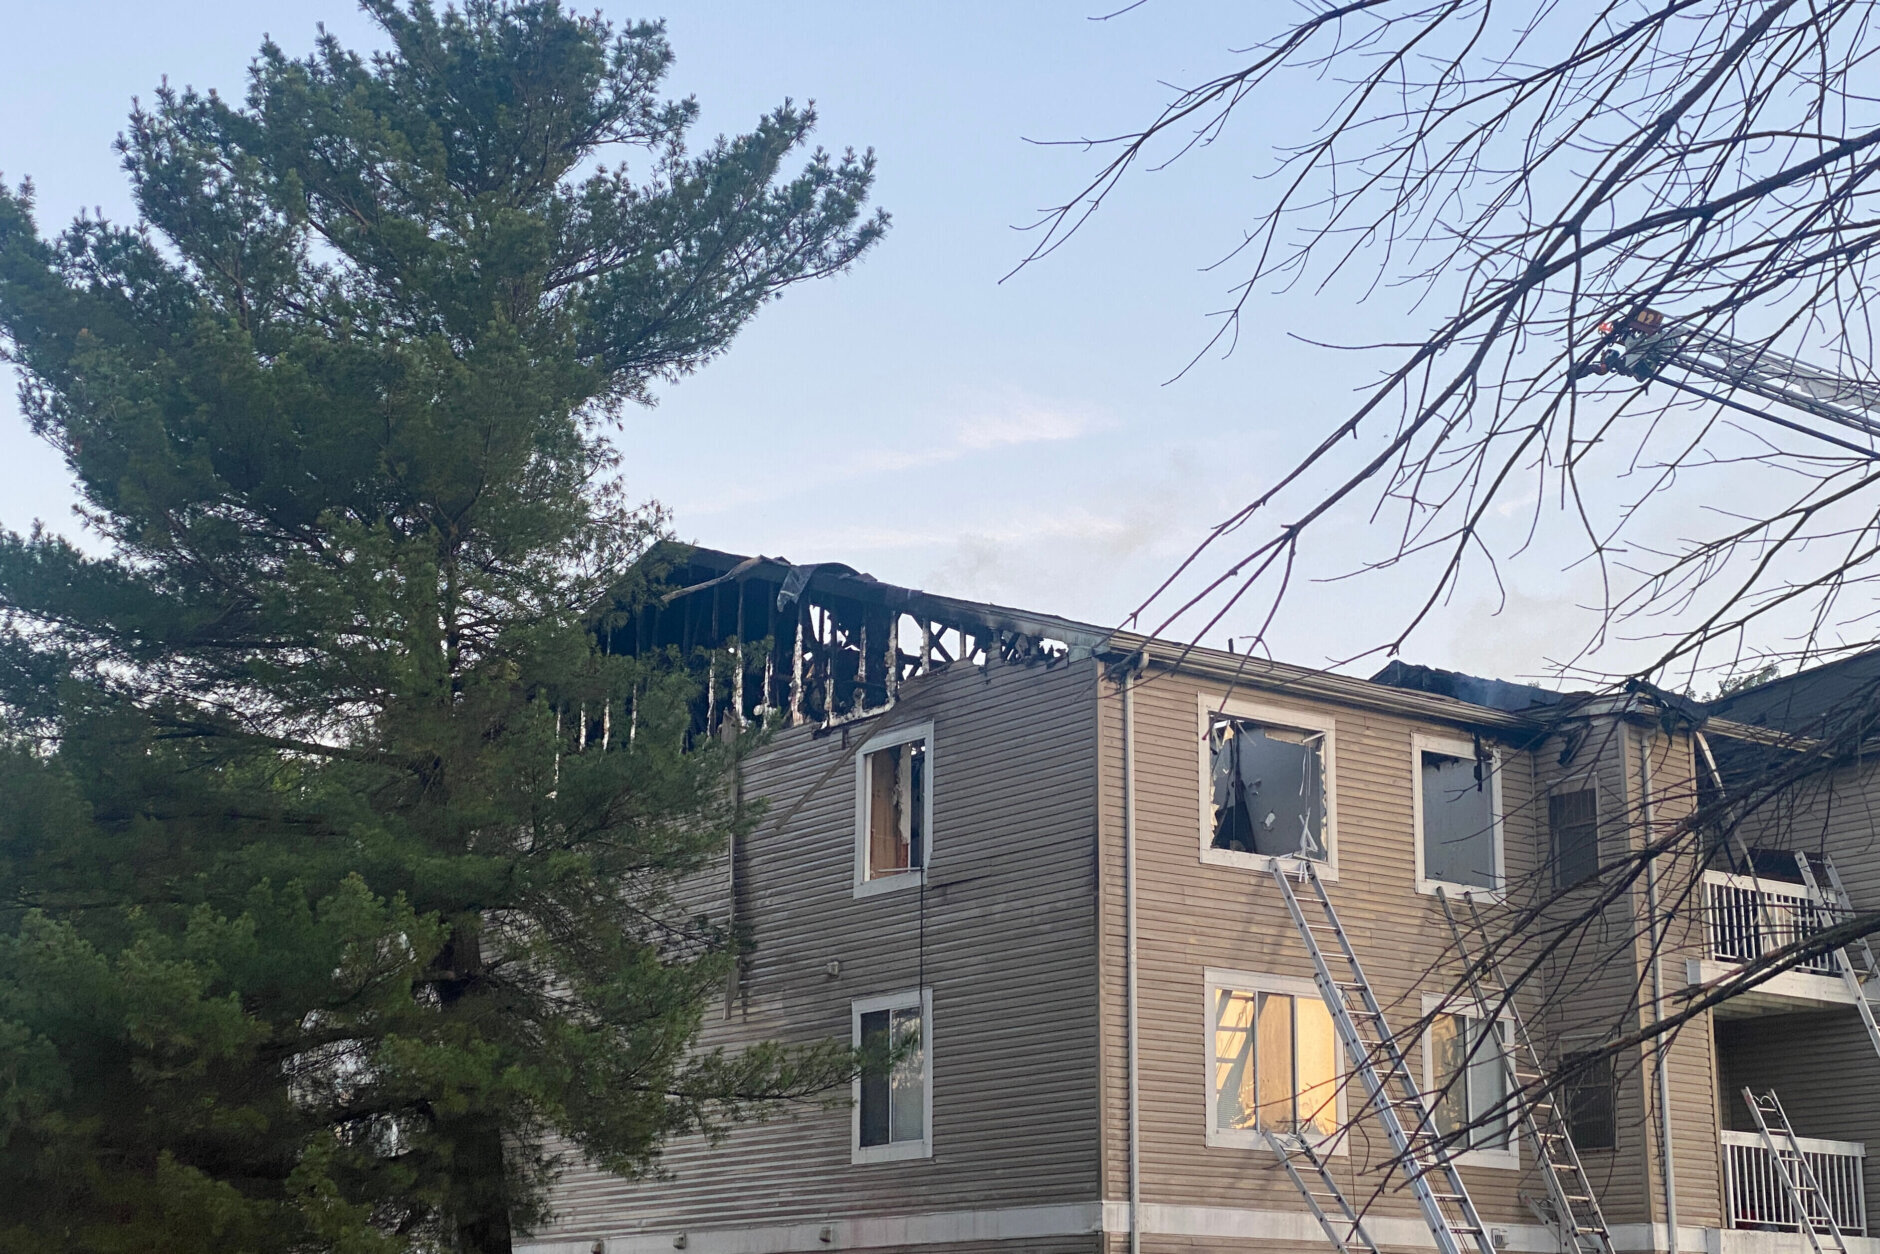 Collapsed roof, broken windows following apartment building fire